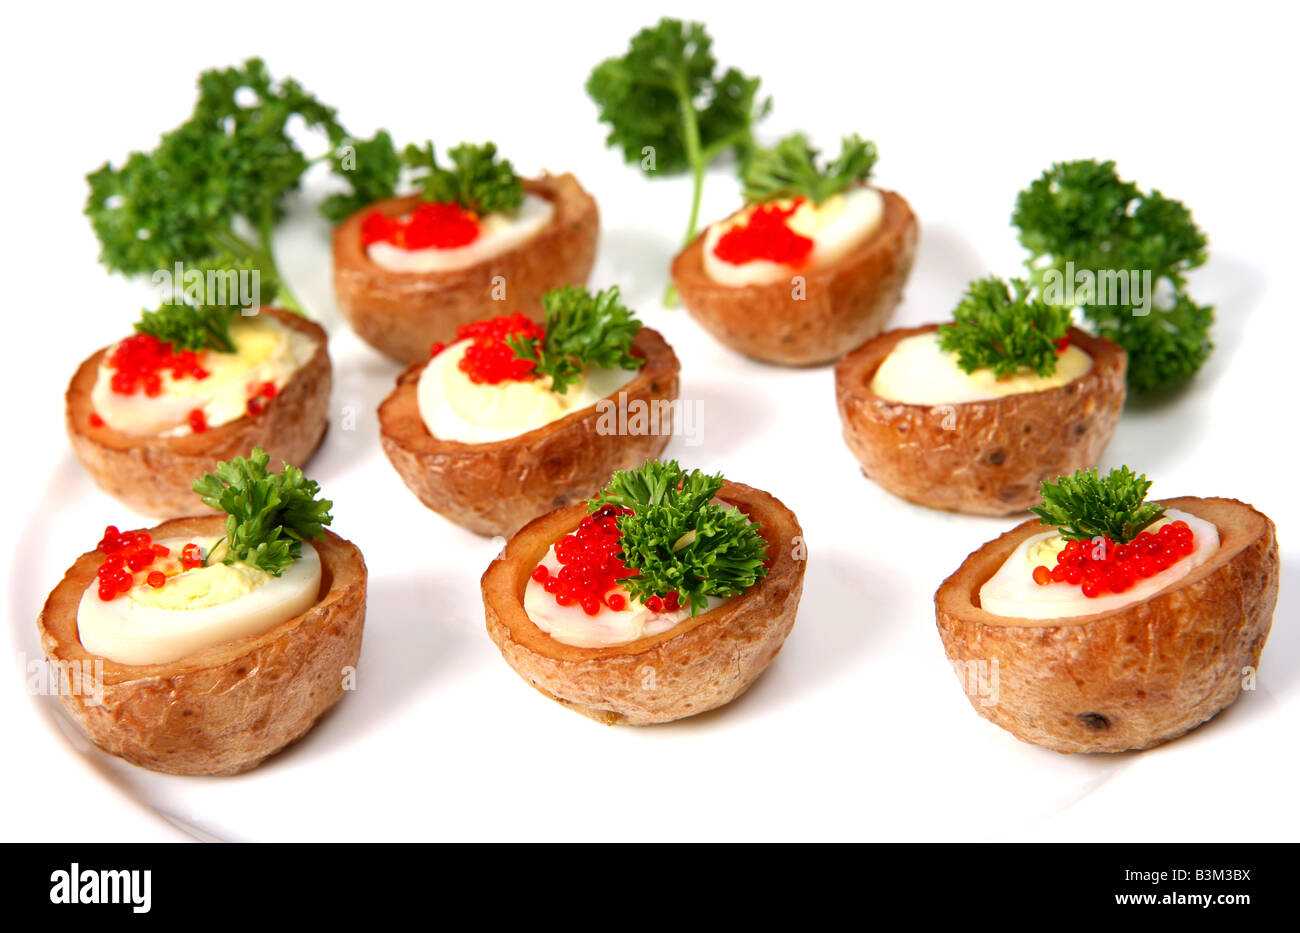 A plate of Quails eggs in tiny baked potato jackets garnished with red lumpfish caviar and parsley Stock Photo